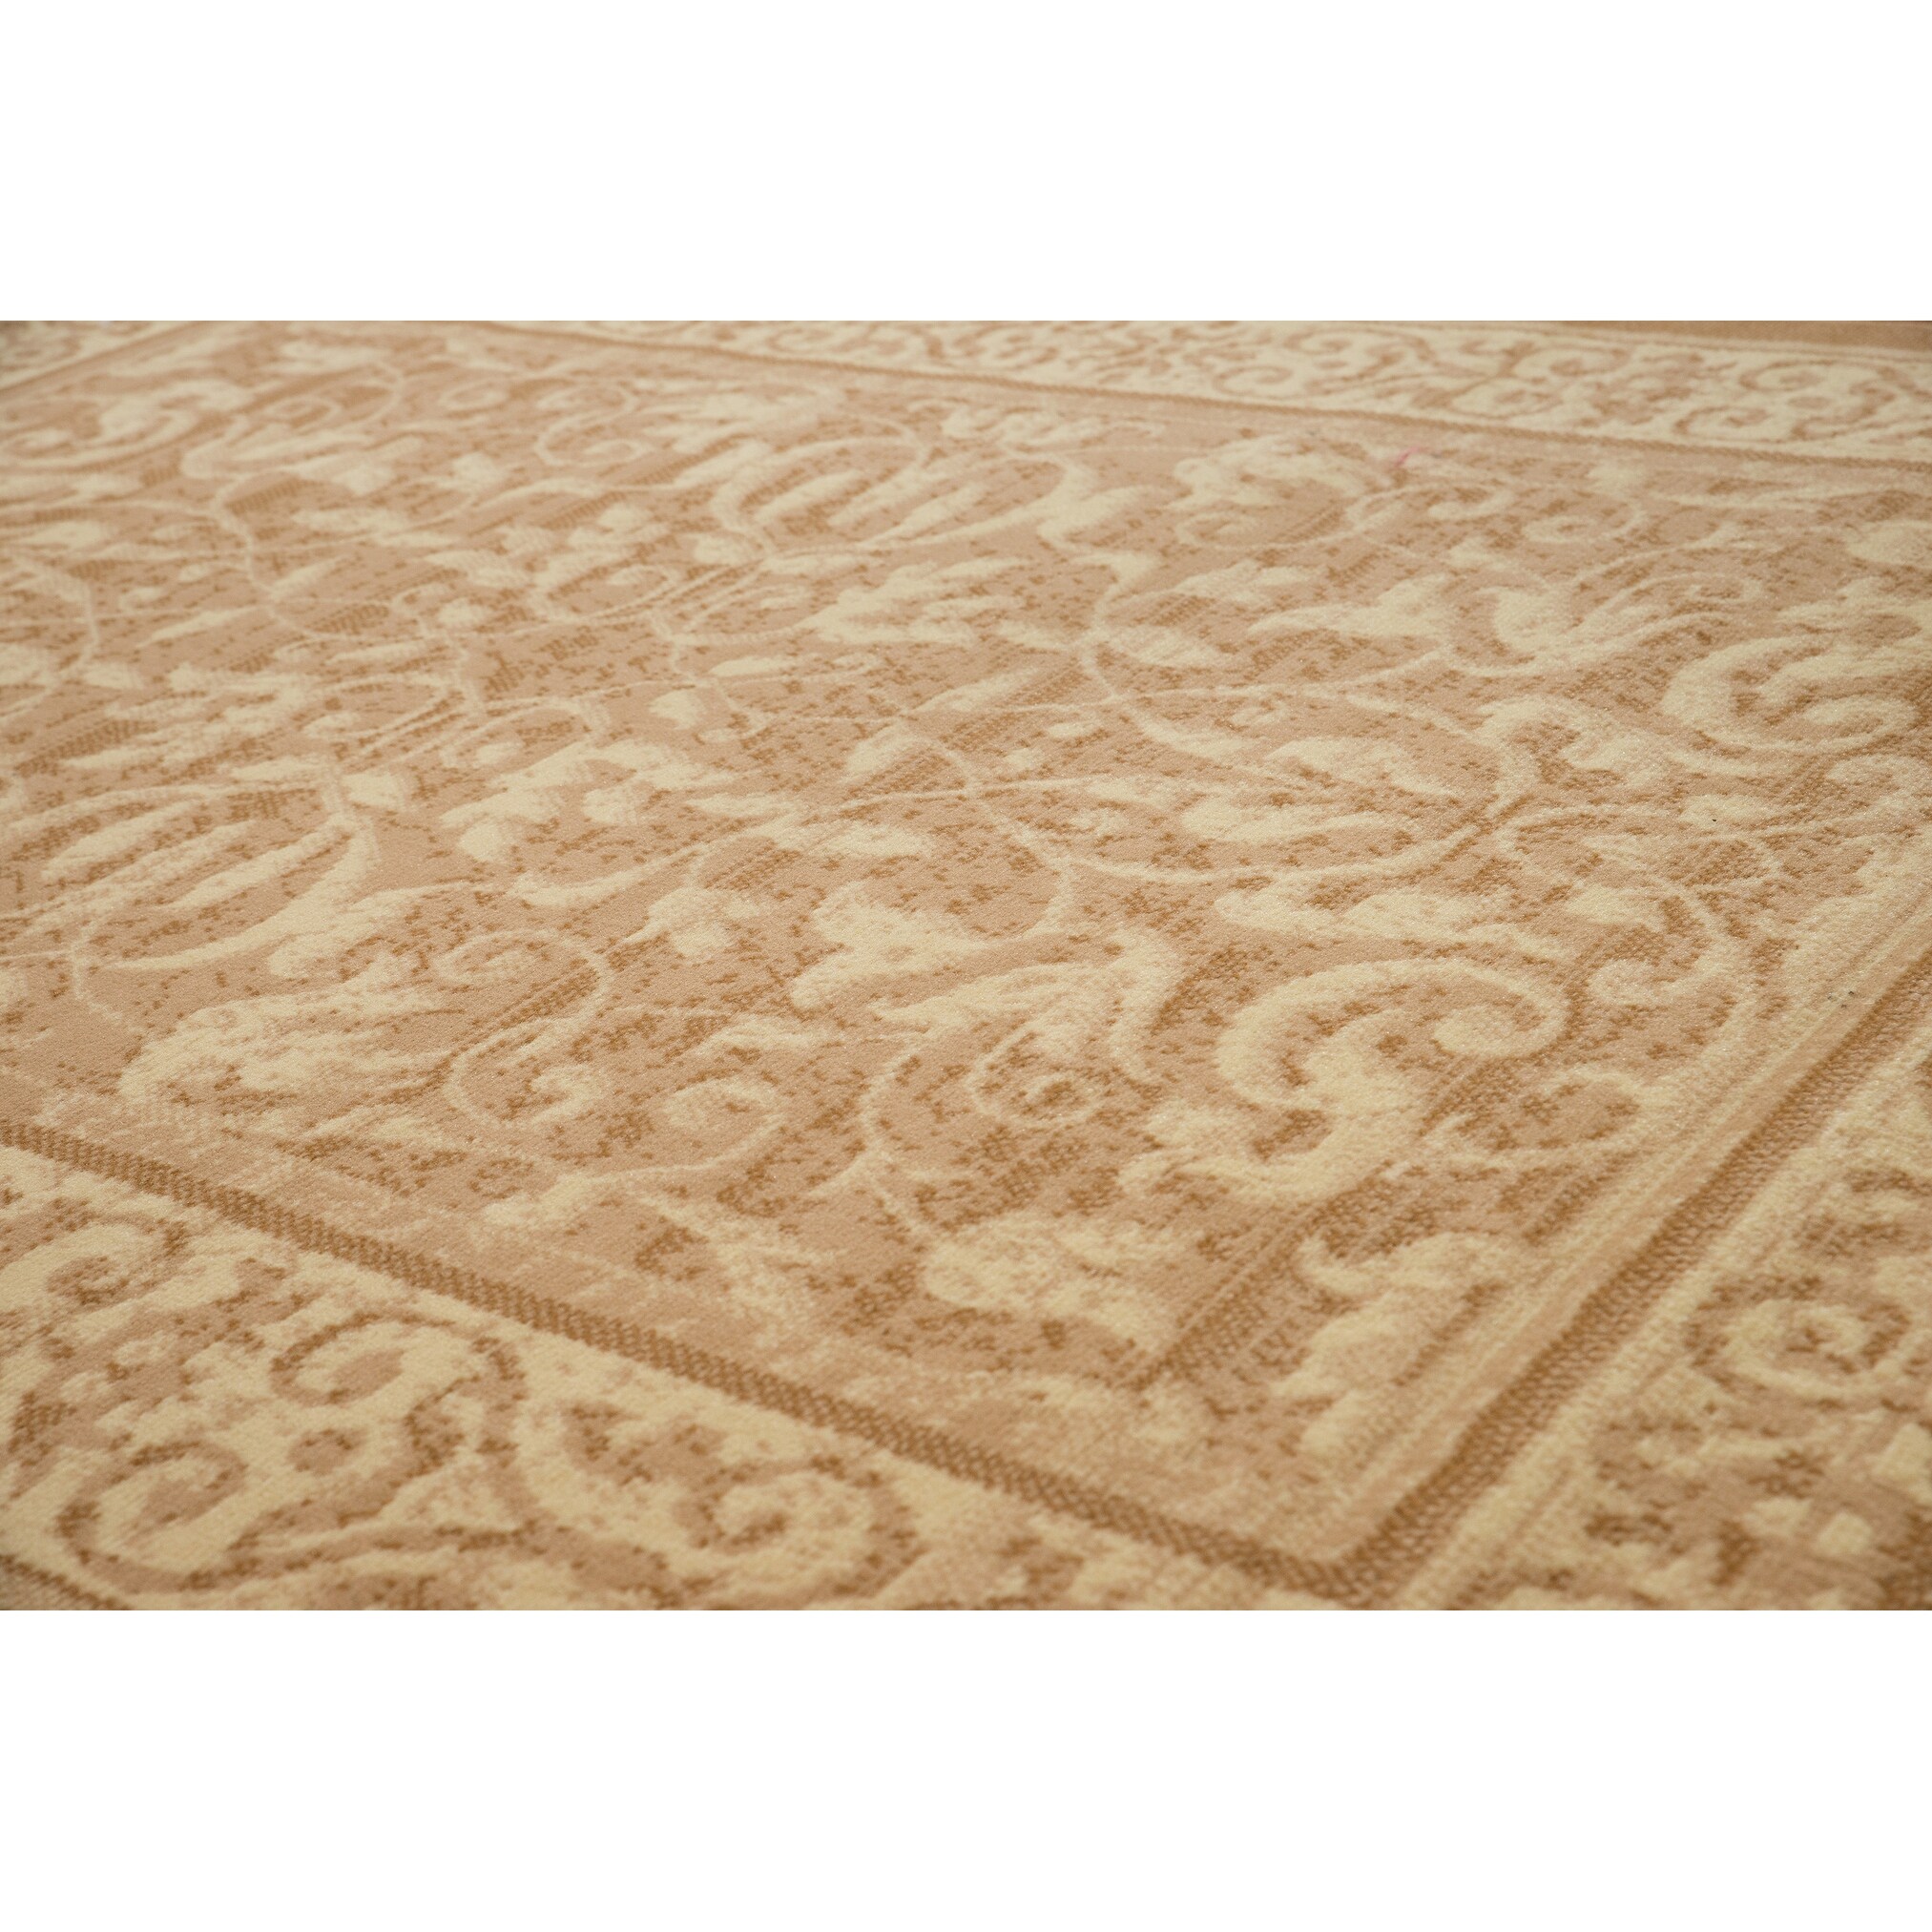 https://ak1.ostkcdn.com/images/products/is/images/direct/daa4df43f7f3942d752903640a6f09600c3ef86b/Westfield-Home-Montclaire-Genevieve-Traditional-Area-Rug.jpg